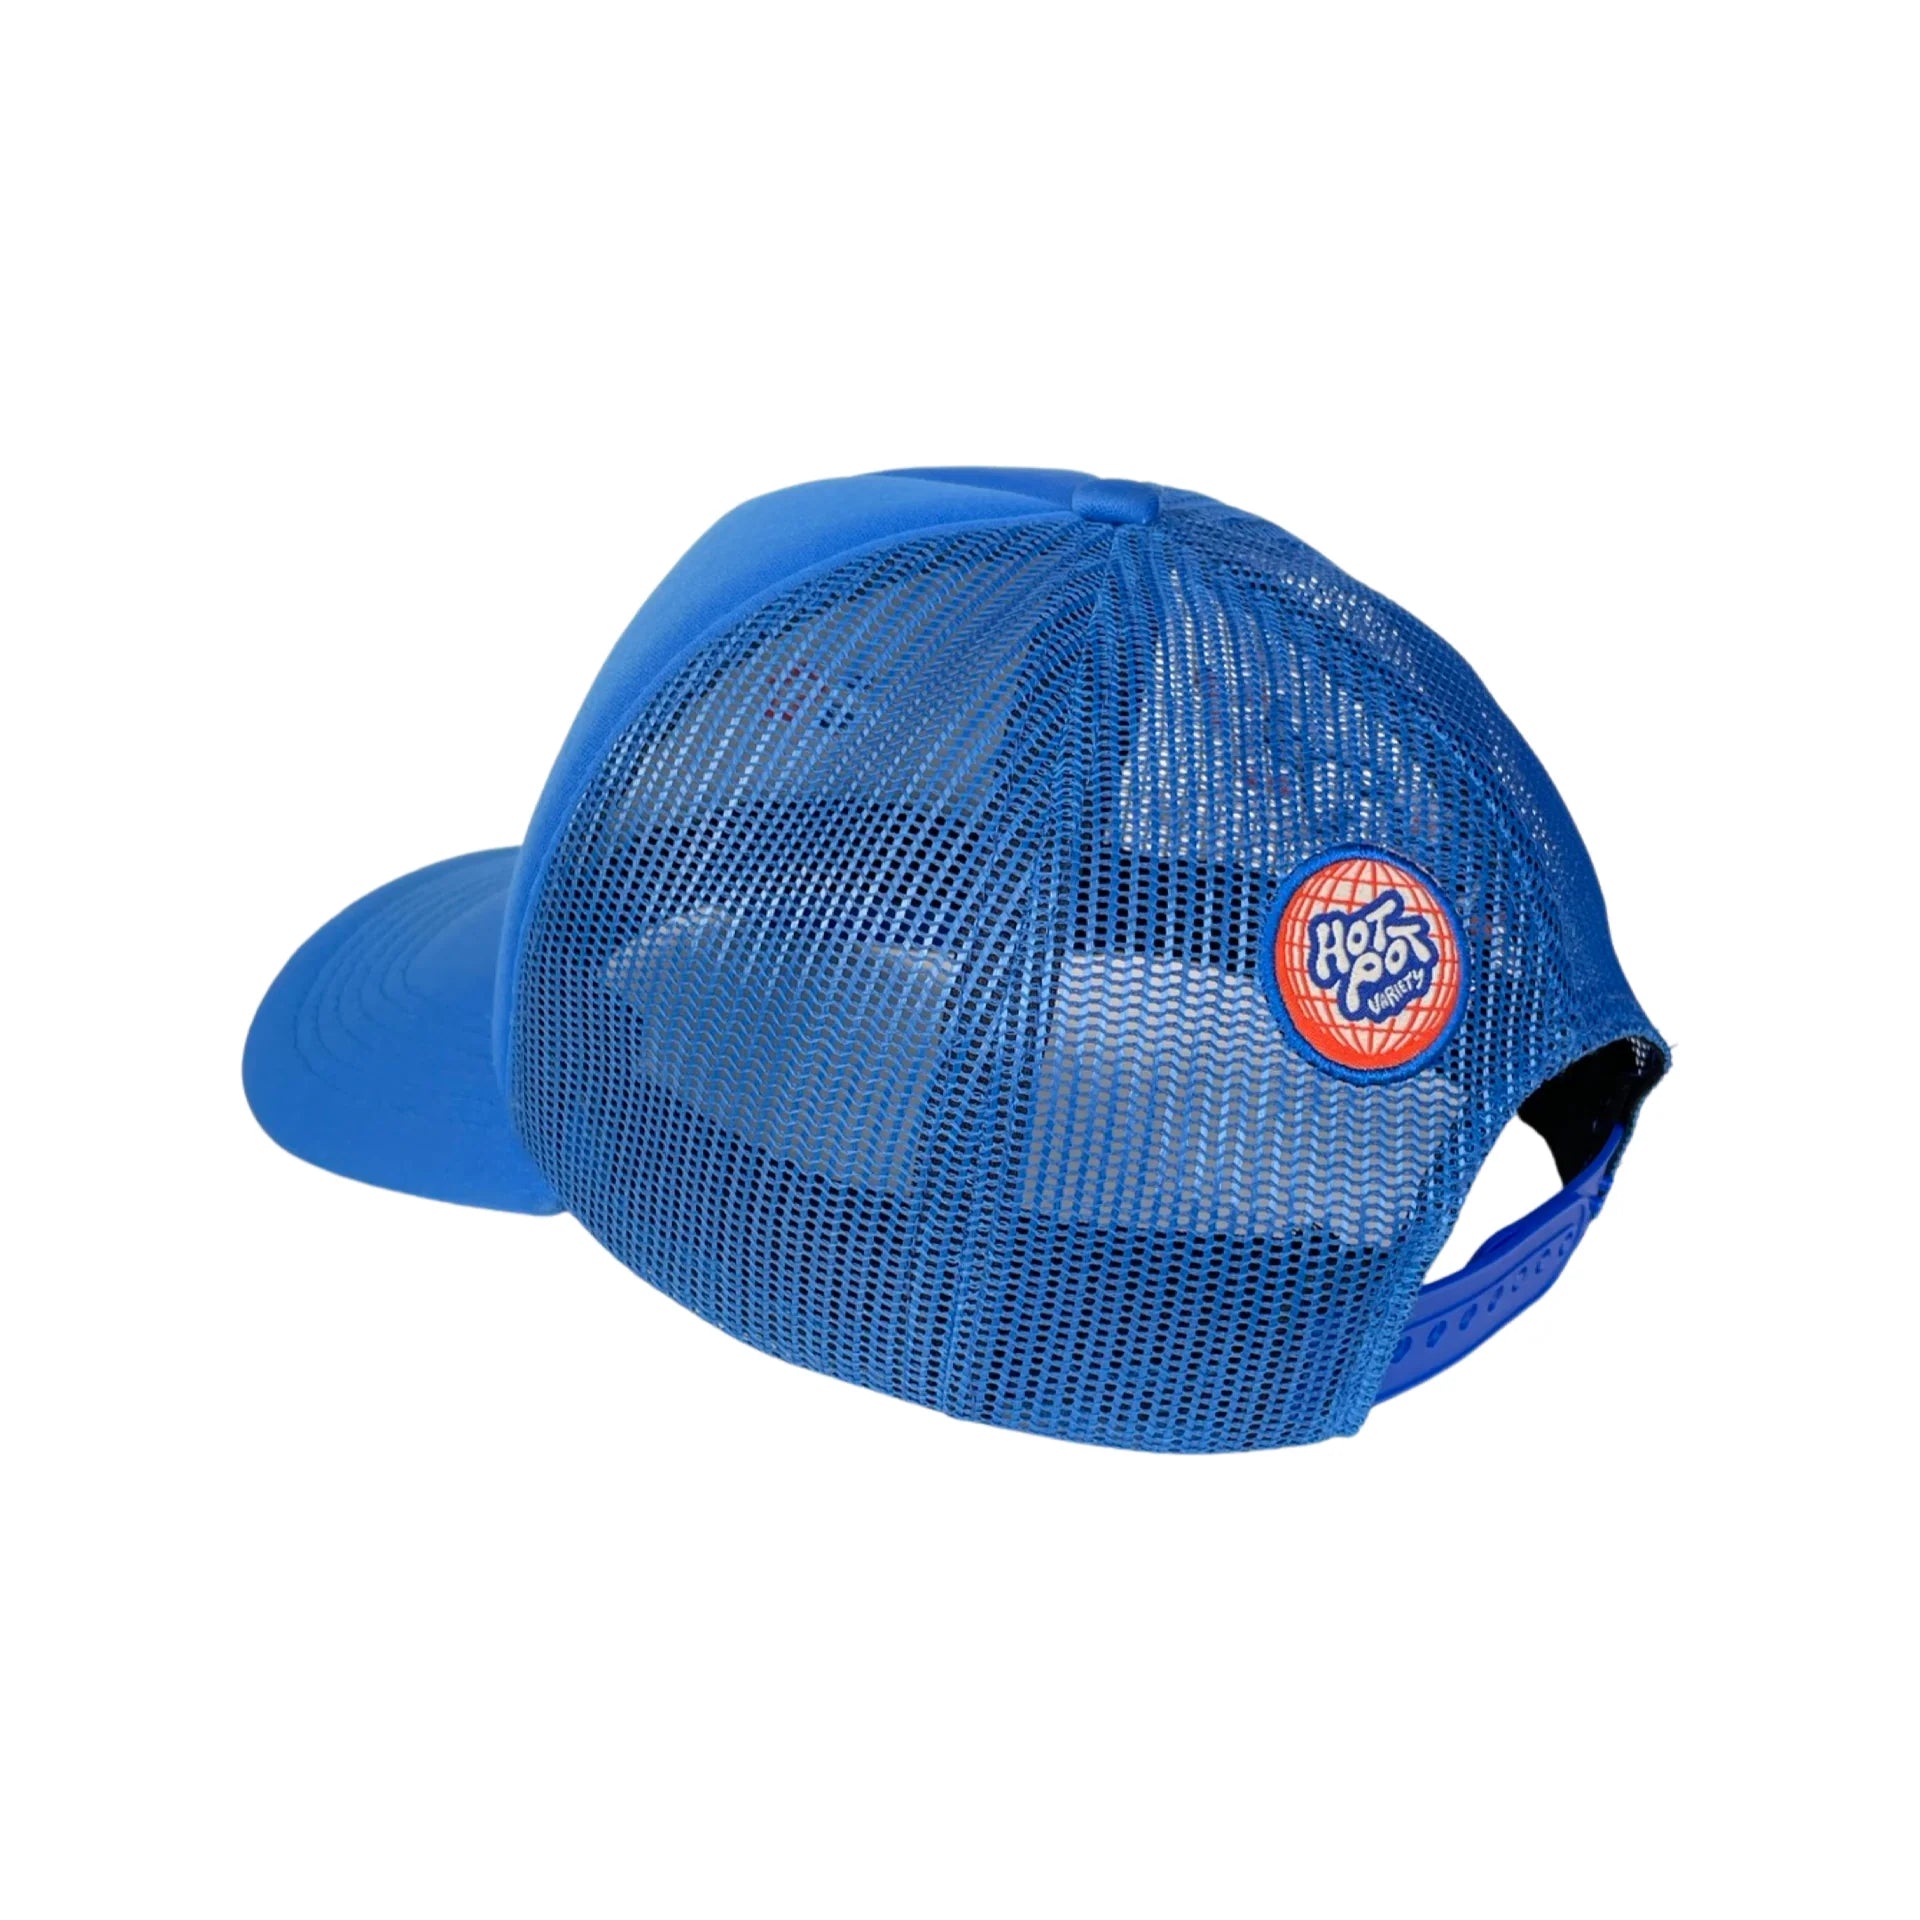 Hot Pot Variety "Diverse in a Global World" embroidered blue trucket hat with orange stars